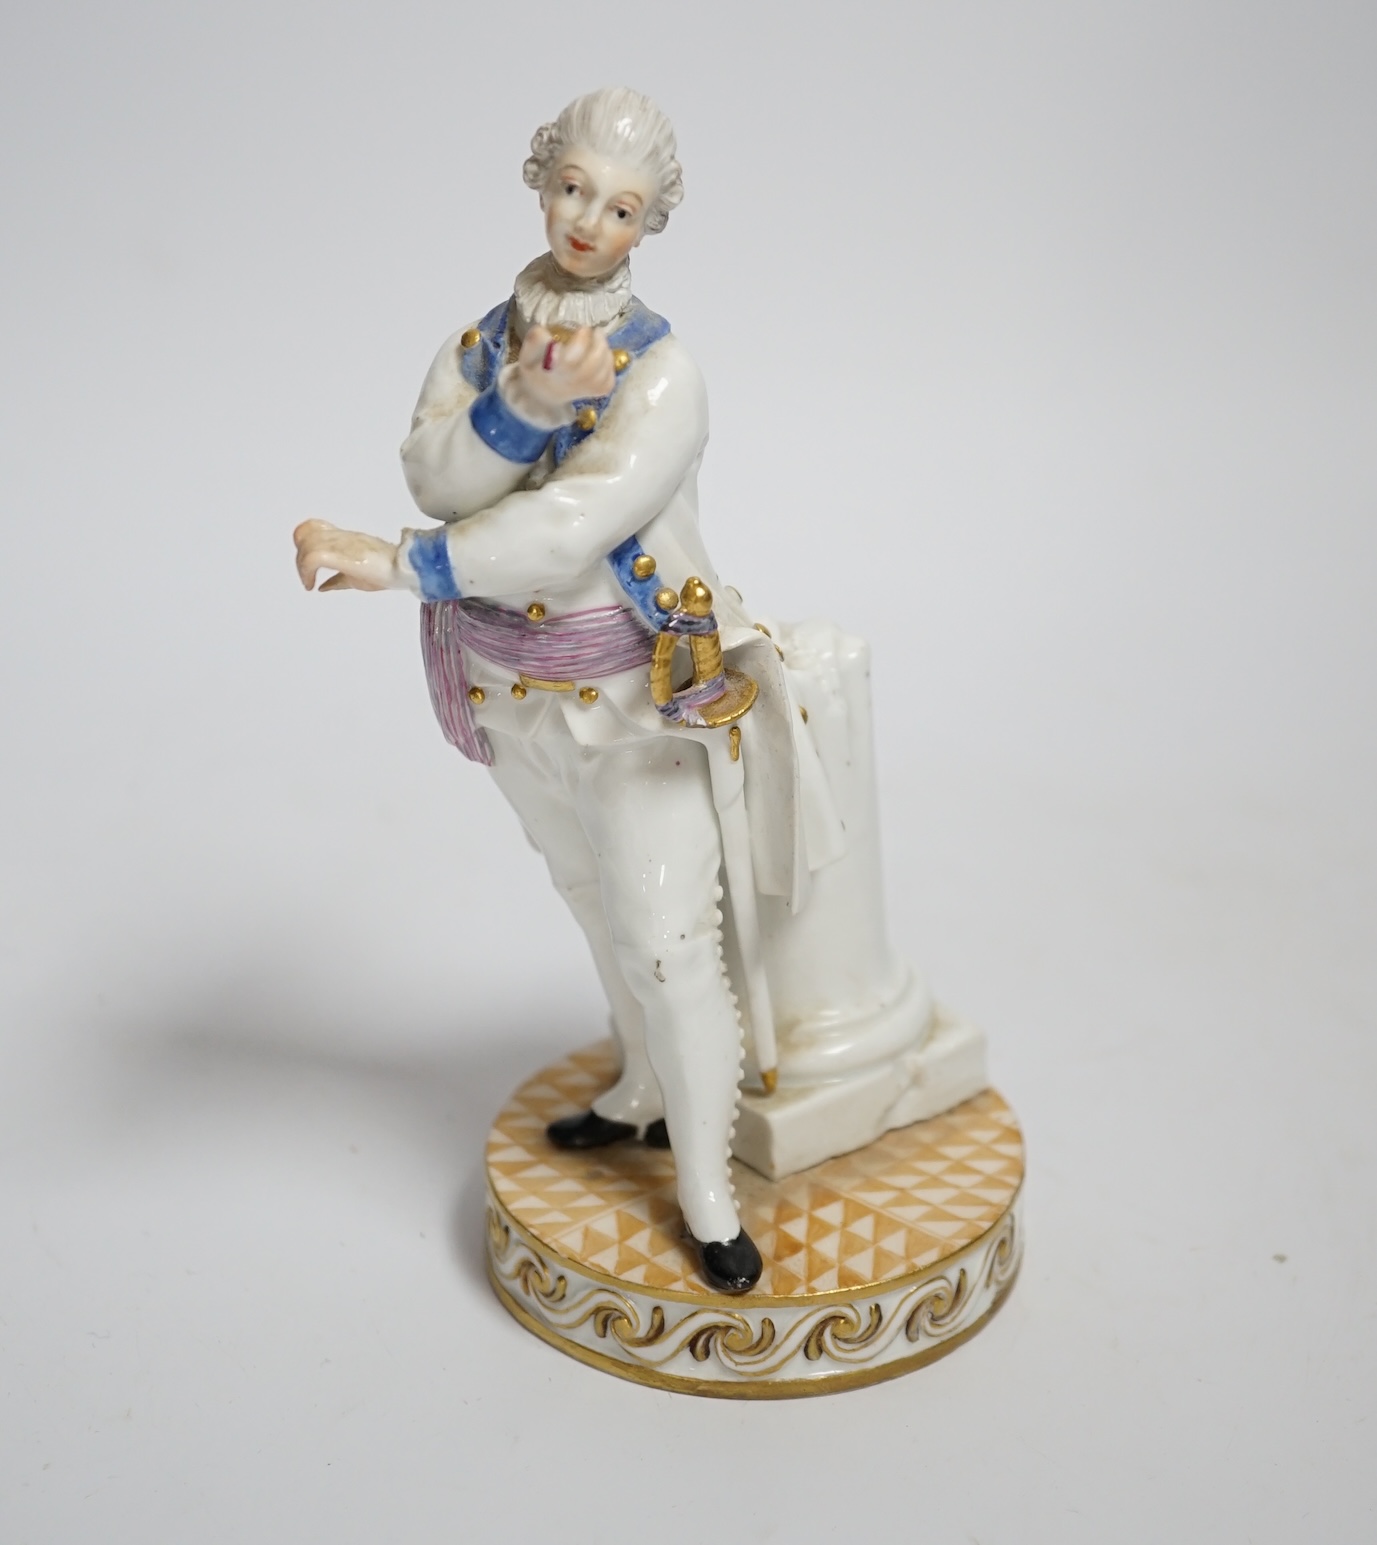 A Meissen style porcelain figure of a soldier in dress uniform with sword and holding aloft a pocket